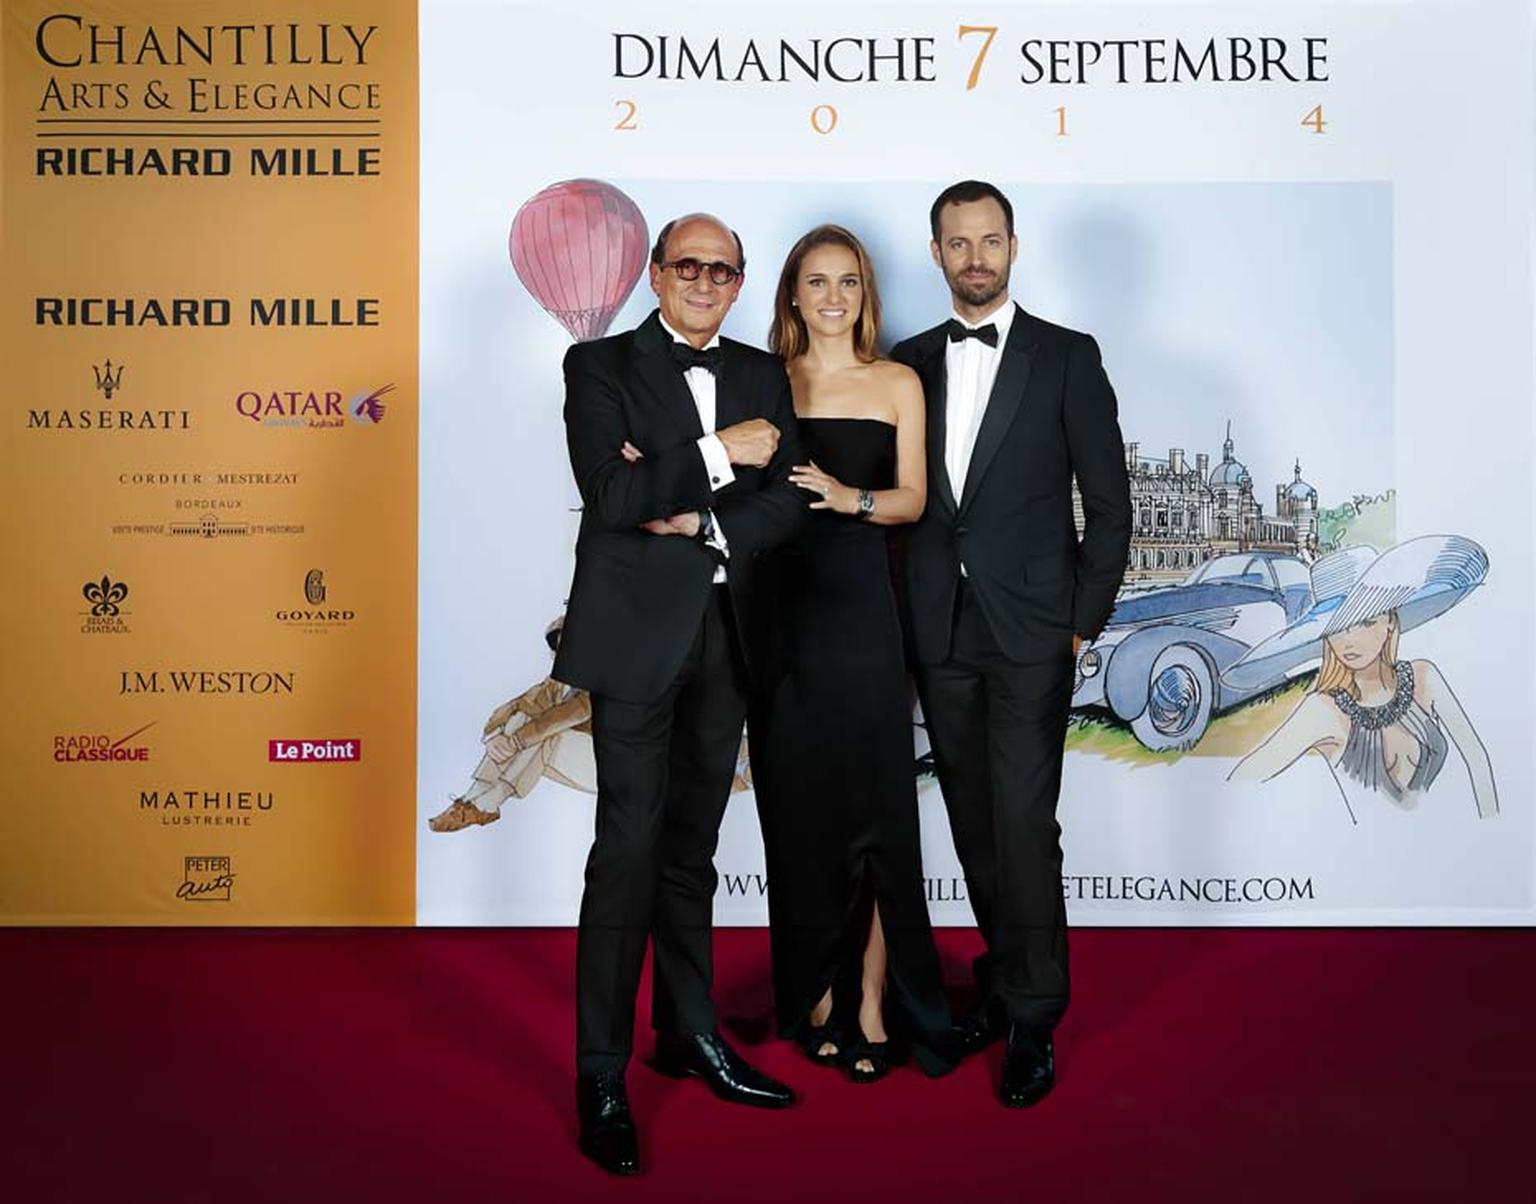 During the Concours d’Elégance dinner, Richard Mille shared a photo opportunity with Natalie Portman, a friend of the brand who helped design the Richard Mille RM 19-01 women's watch, and her husband Benjamin Millepied.